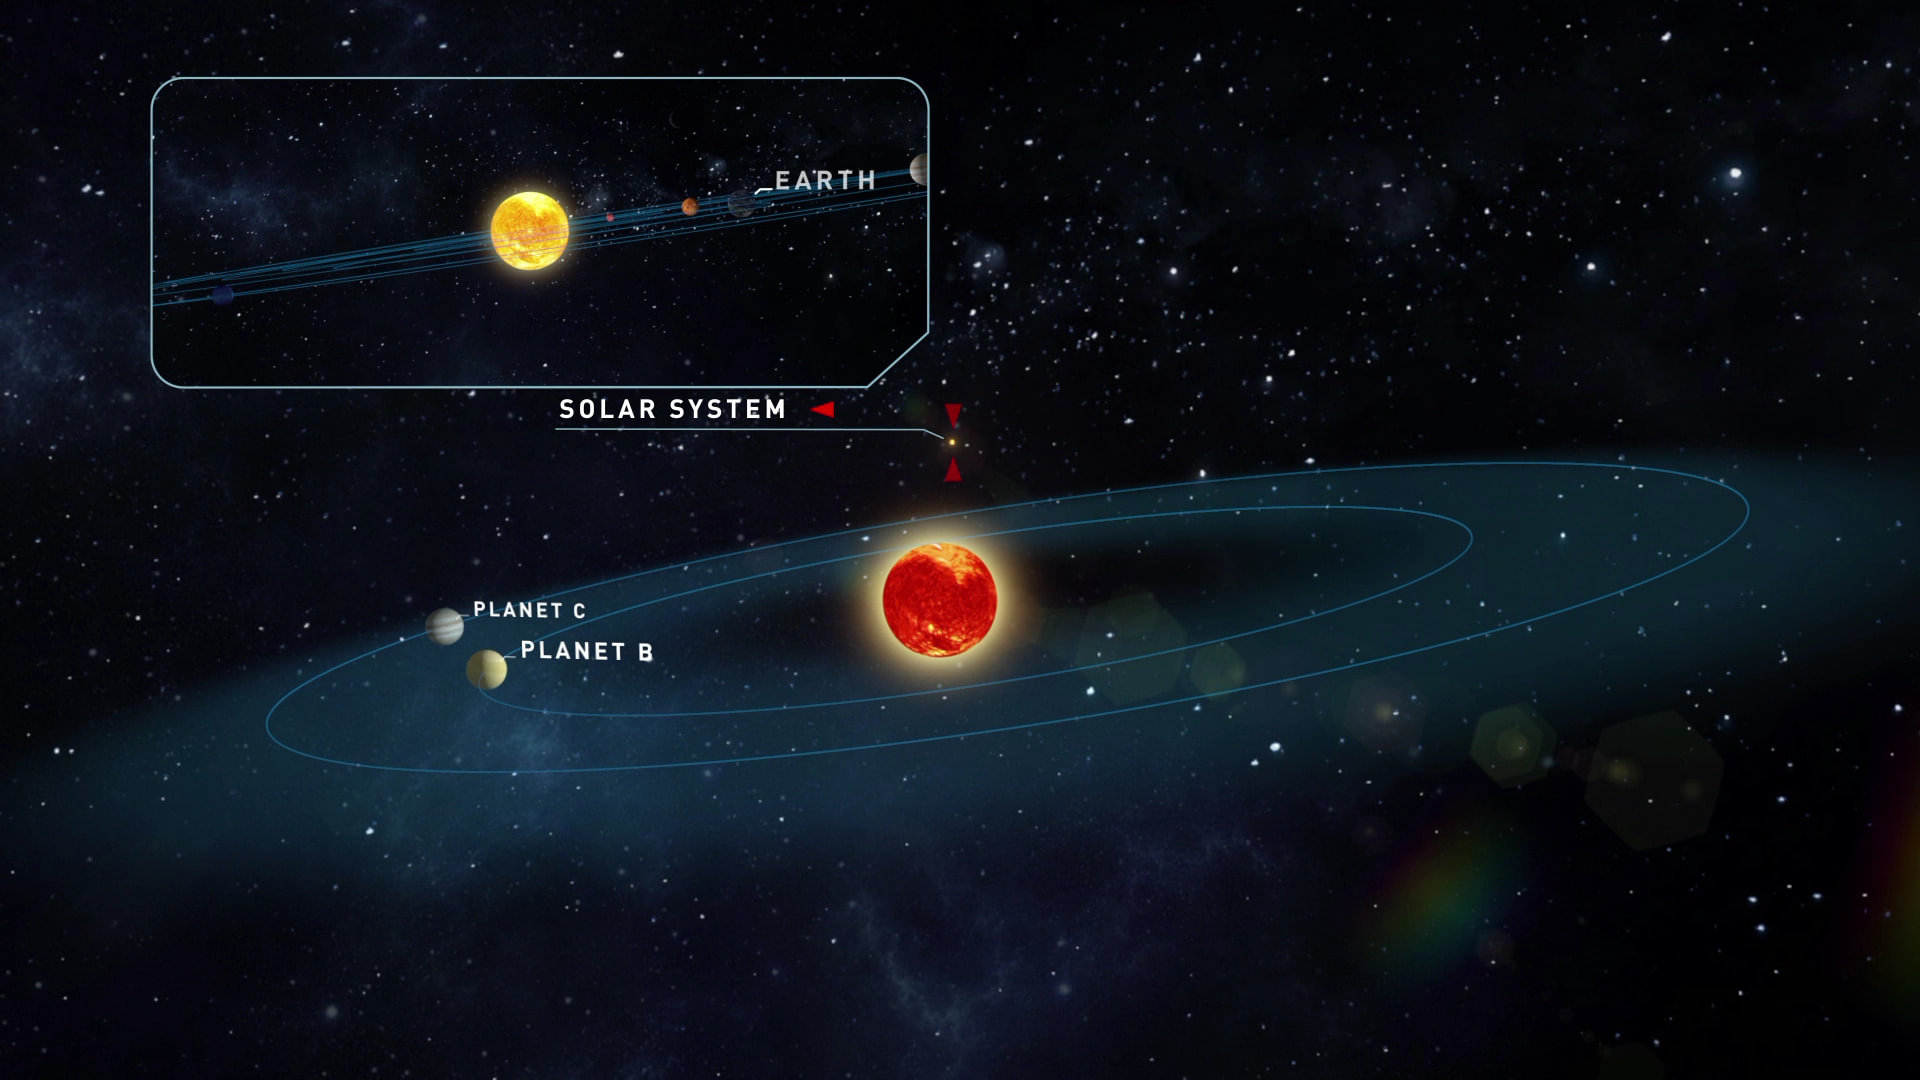 Two New Earth-Like Exoplanets